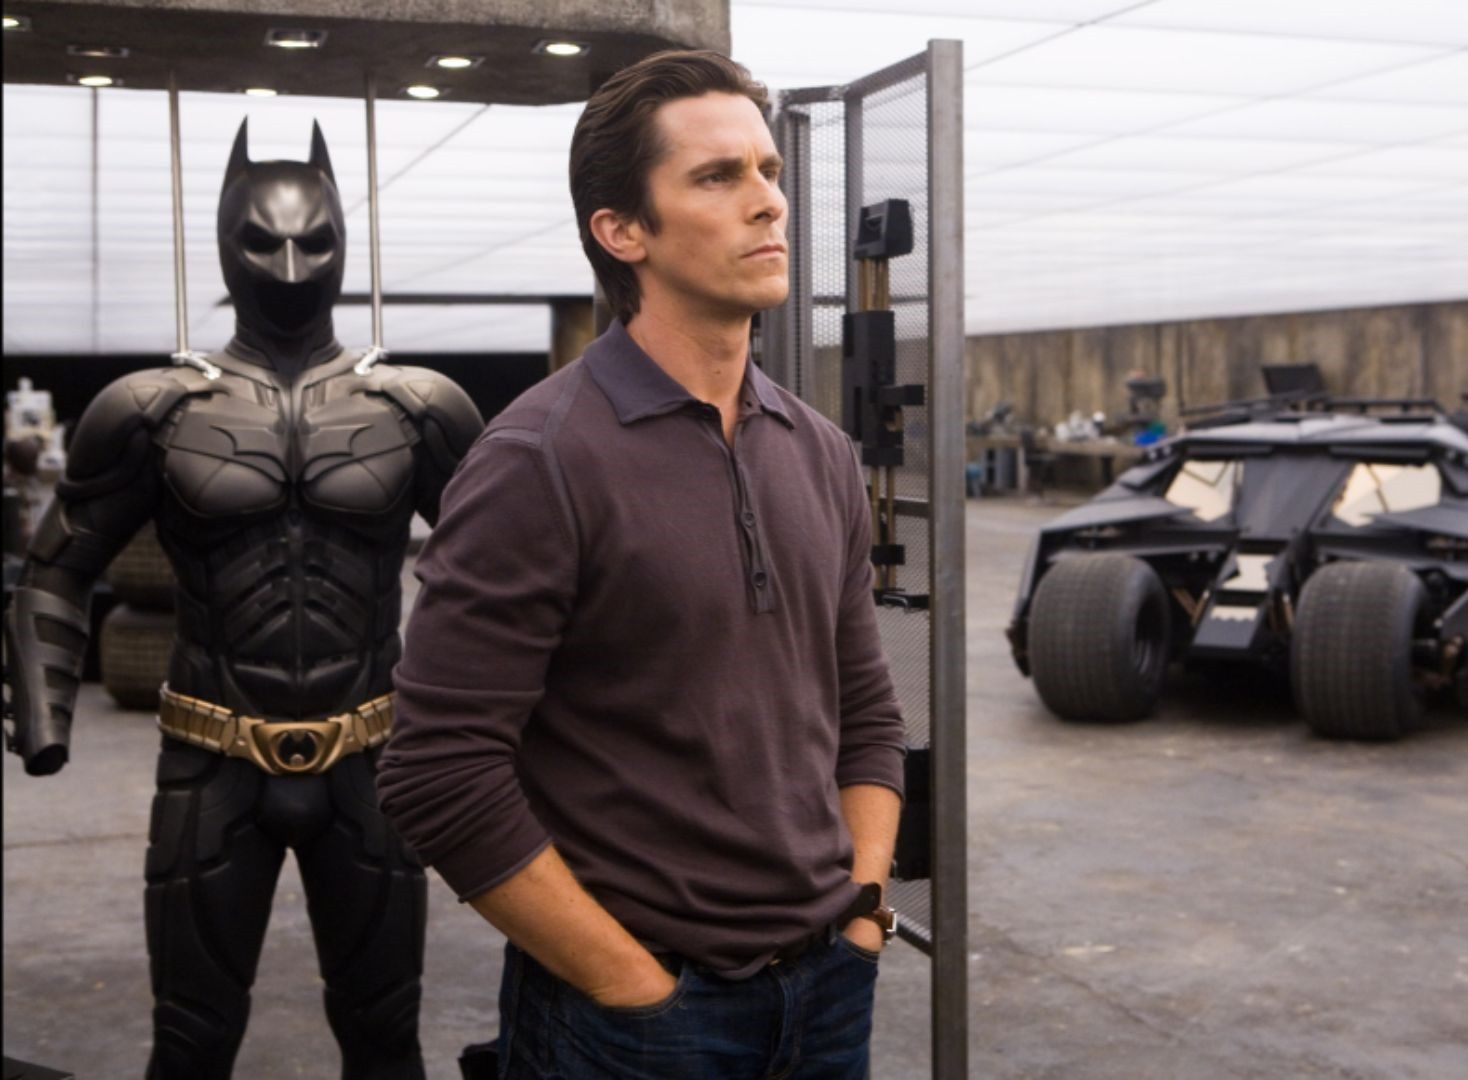 Christian Bale to play Batman again if Christopher Nolan directs